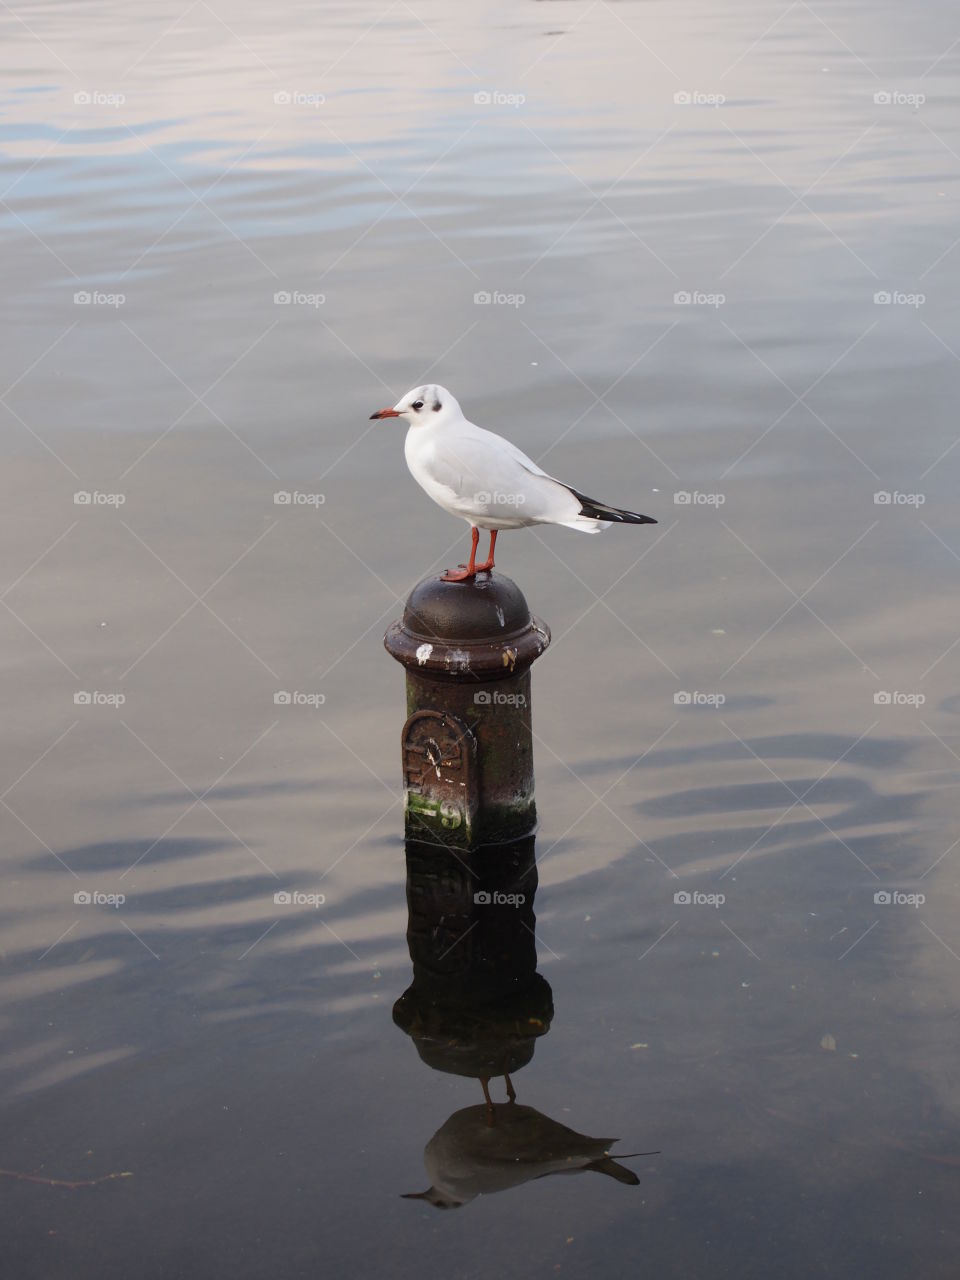 Reflection of seagull in the water